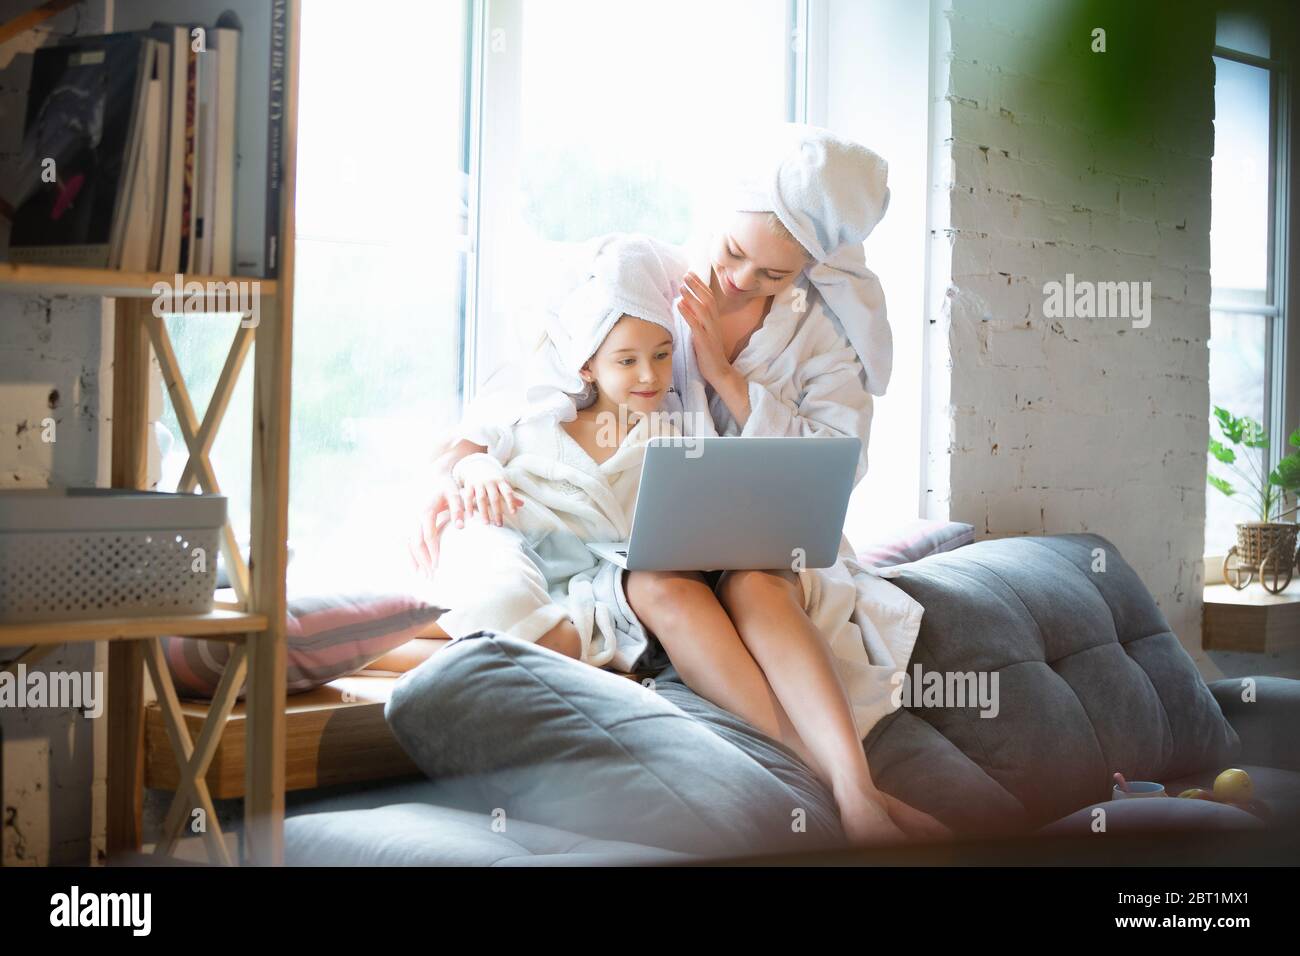 Mother and daughter, sisters have quite, beauty and fun day together at home. Comfort and togetherness. Concept of childhood, happiness, family's weekend, friendship, pajamas party. Domestic lifestyle. Stock Photo